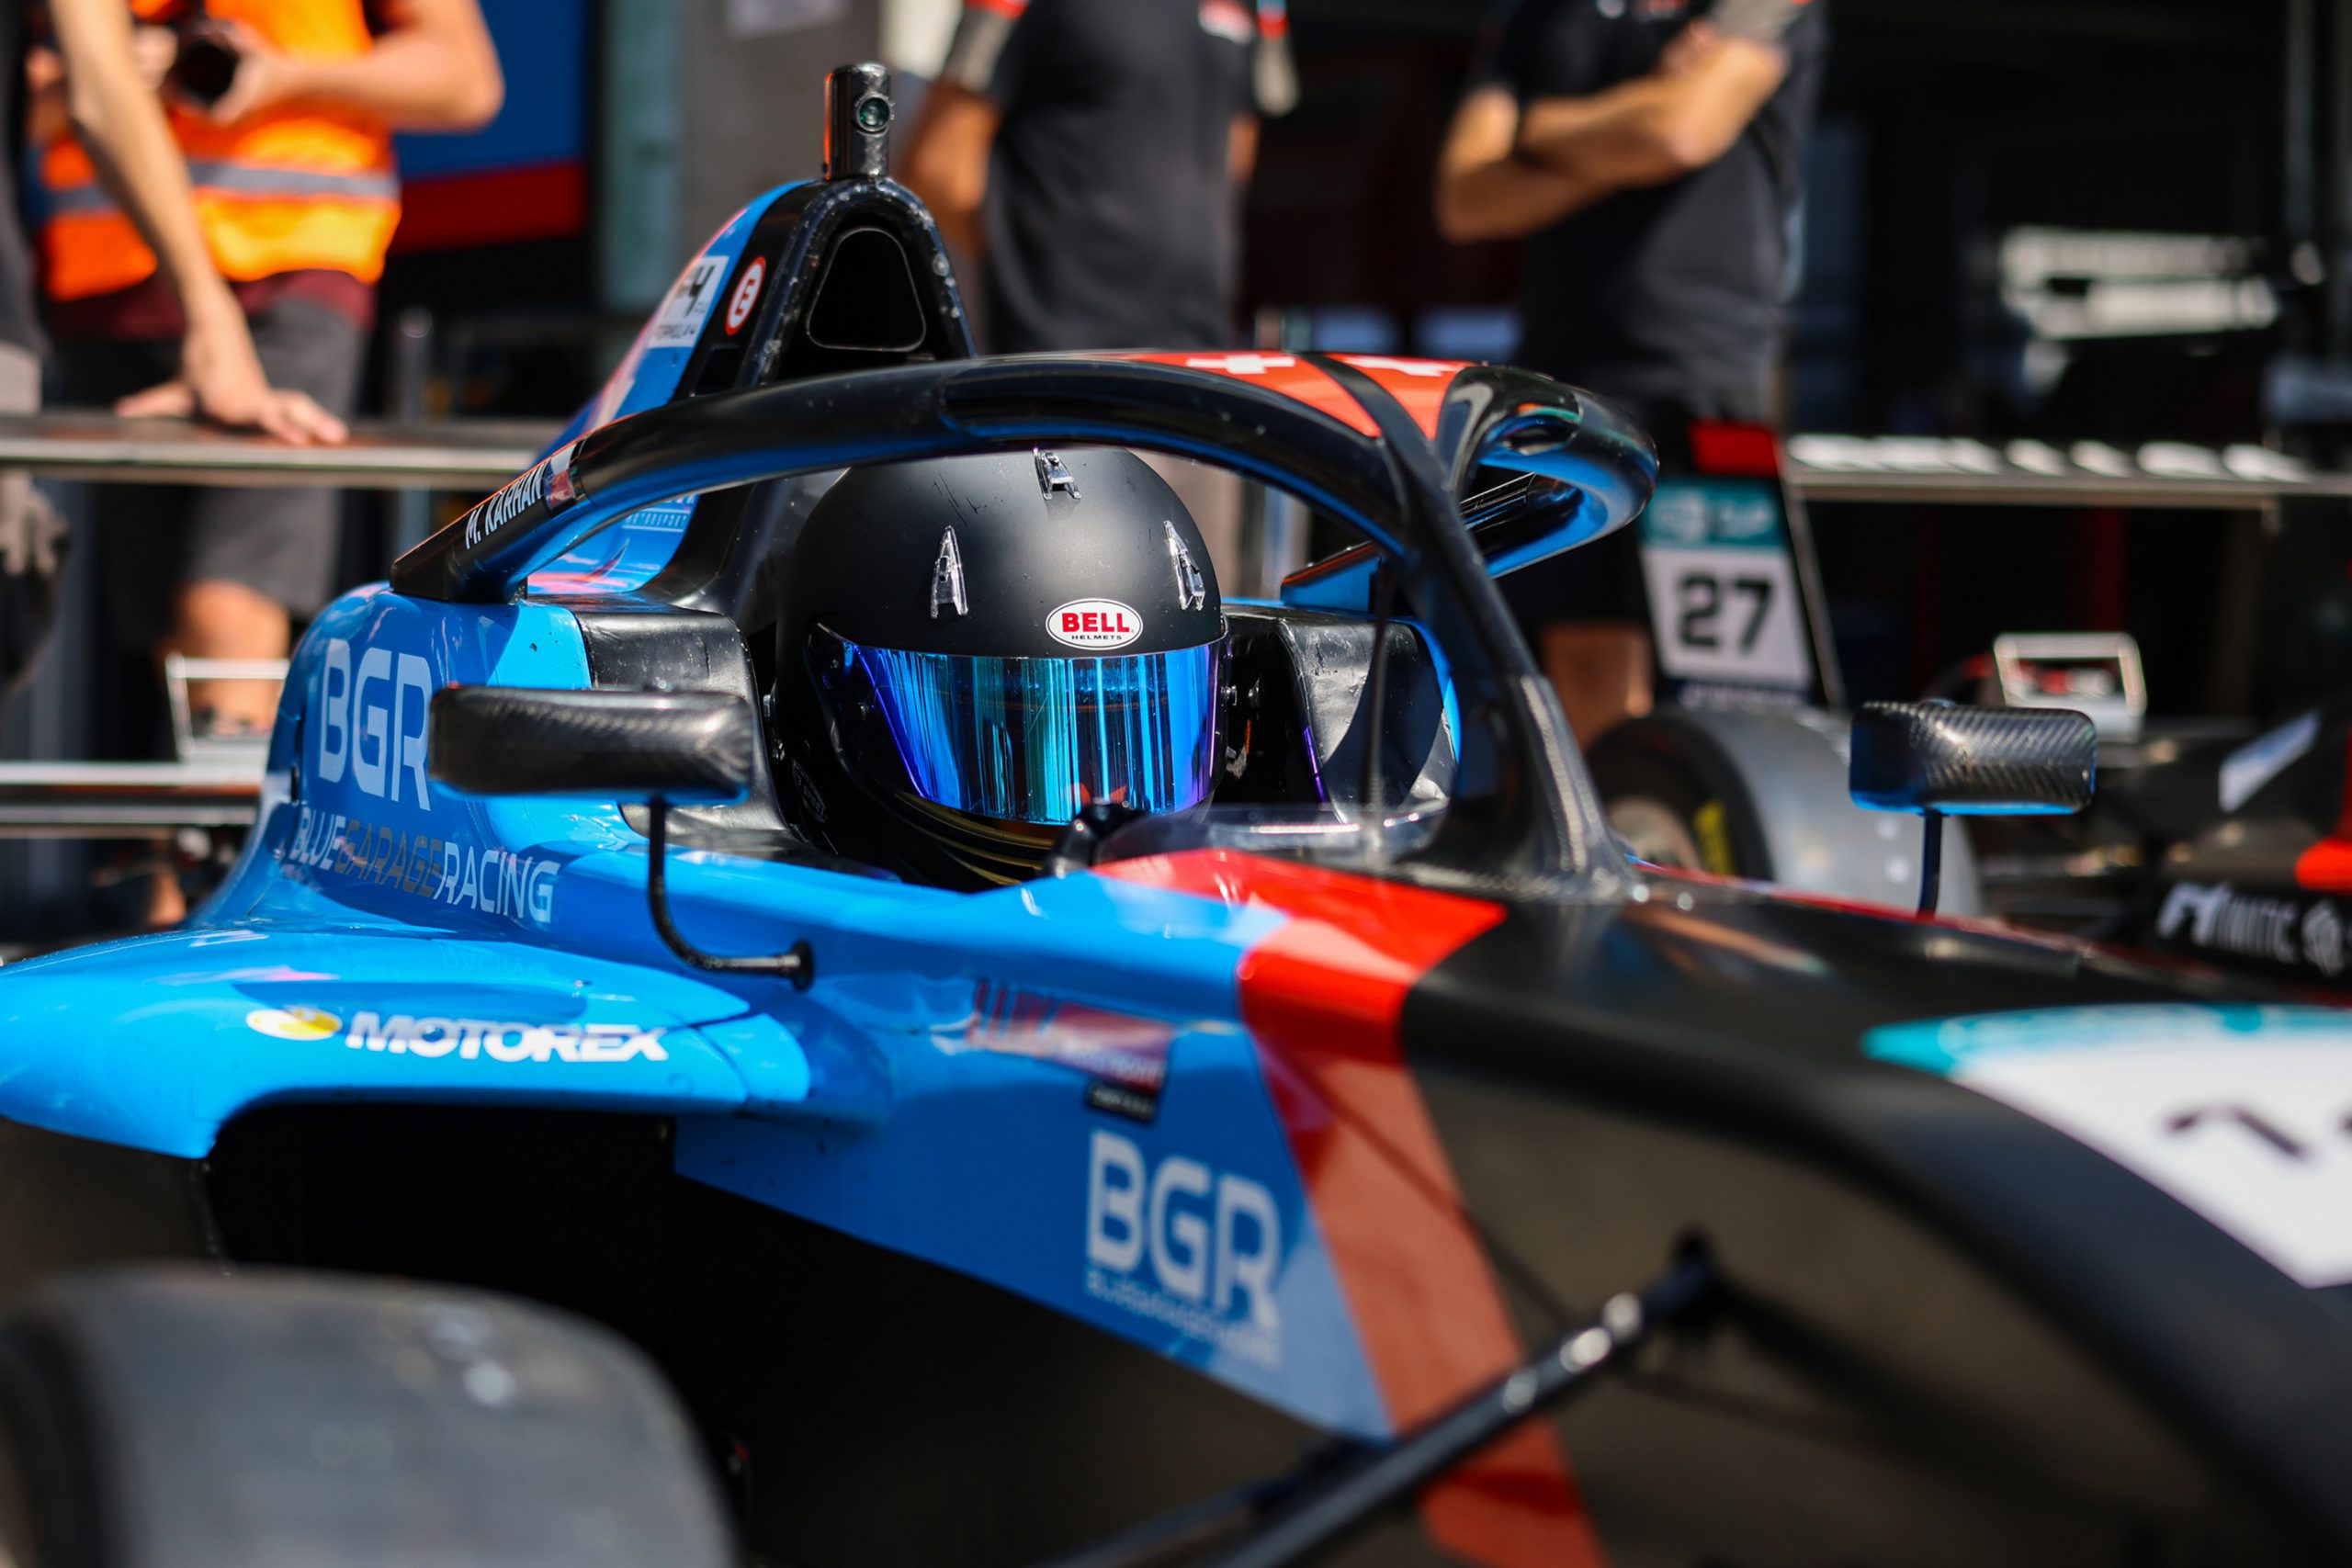 Jenzer Motorsport is a very professional team, says Max Karhan